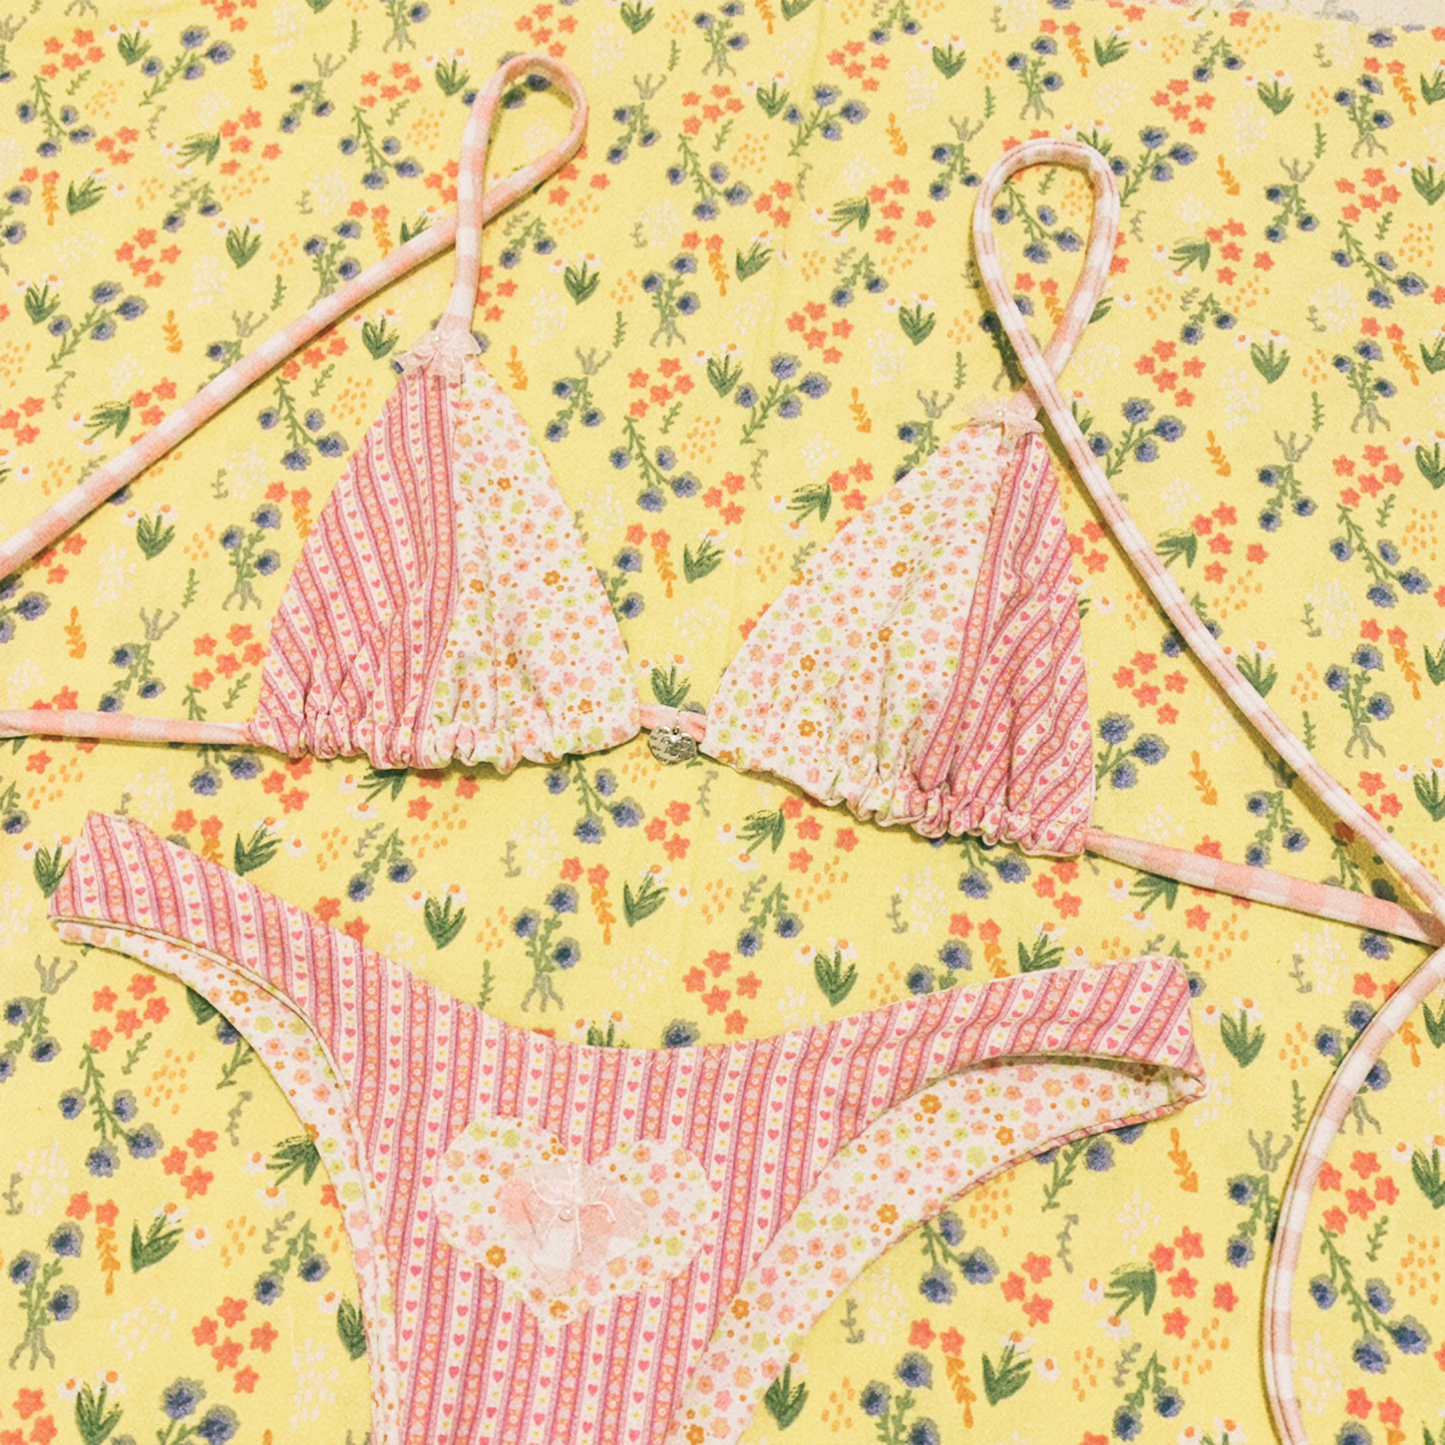 Vintage inspired patchwork 'Shelby' bikini top, made with White ditsy calico, Pink folk inspired & gingham fabrics by Billie Brooks